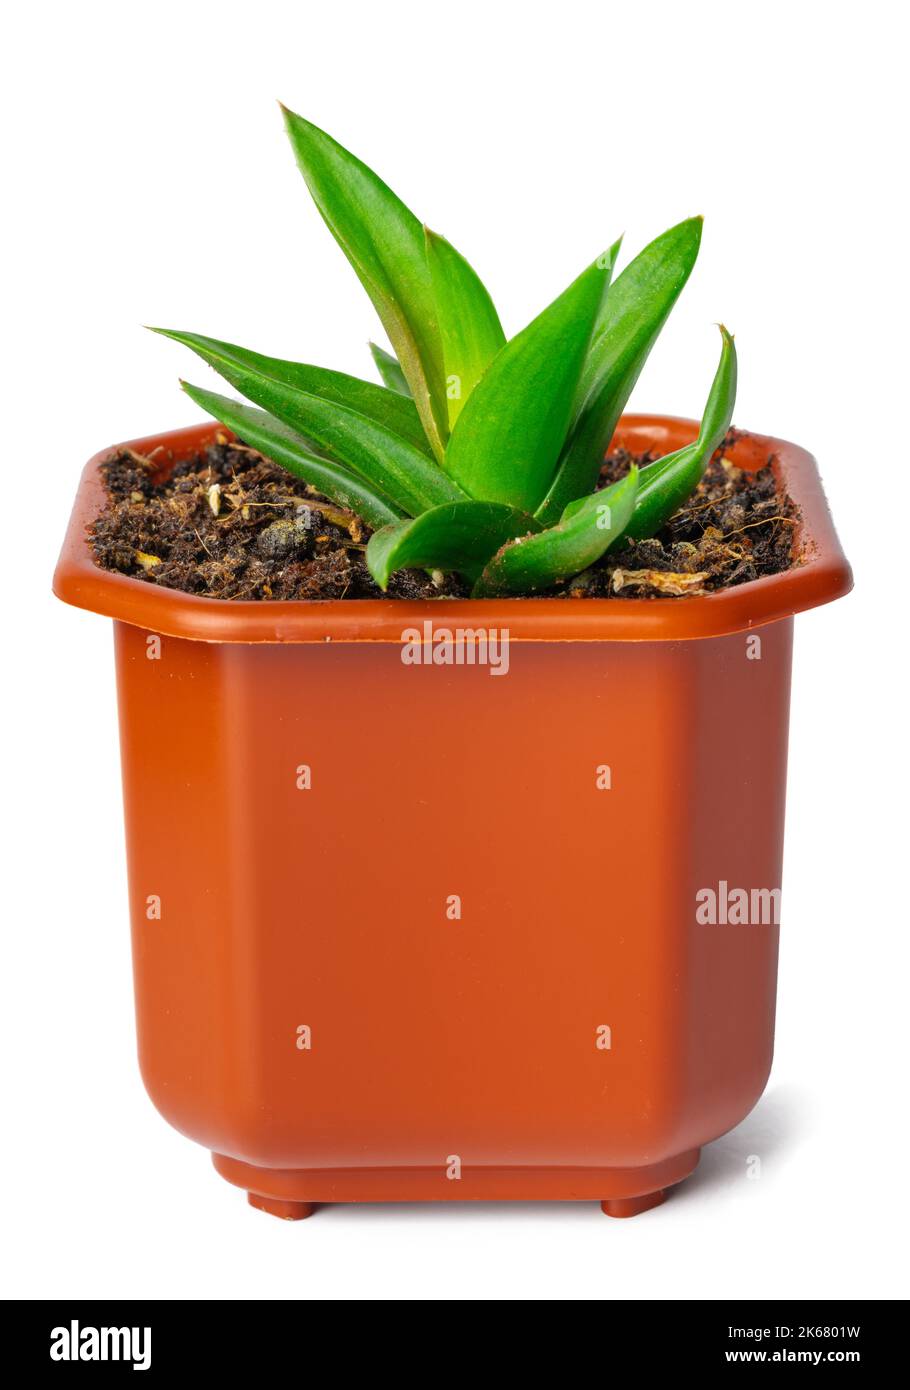 Potted succulent plant isolated on white background Stock Photo